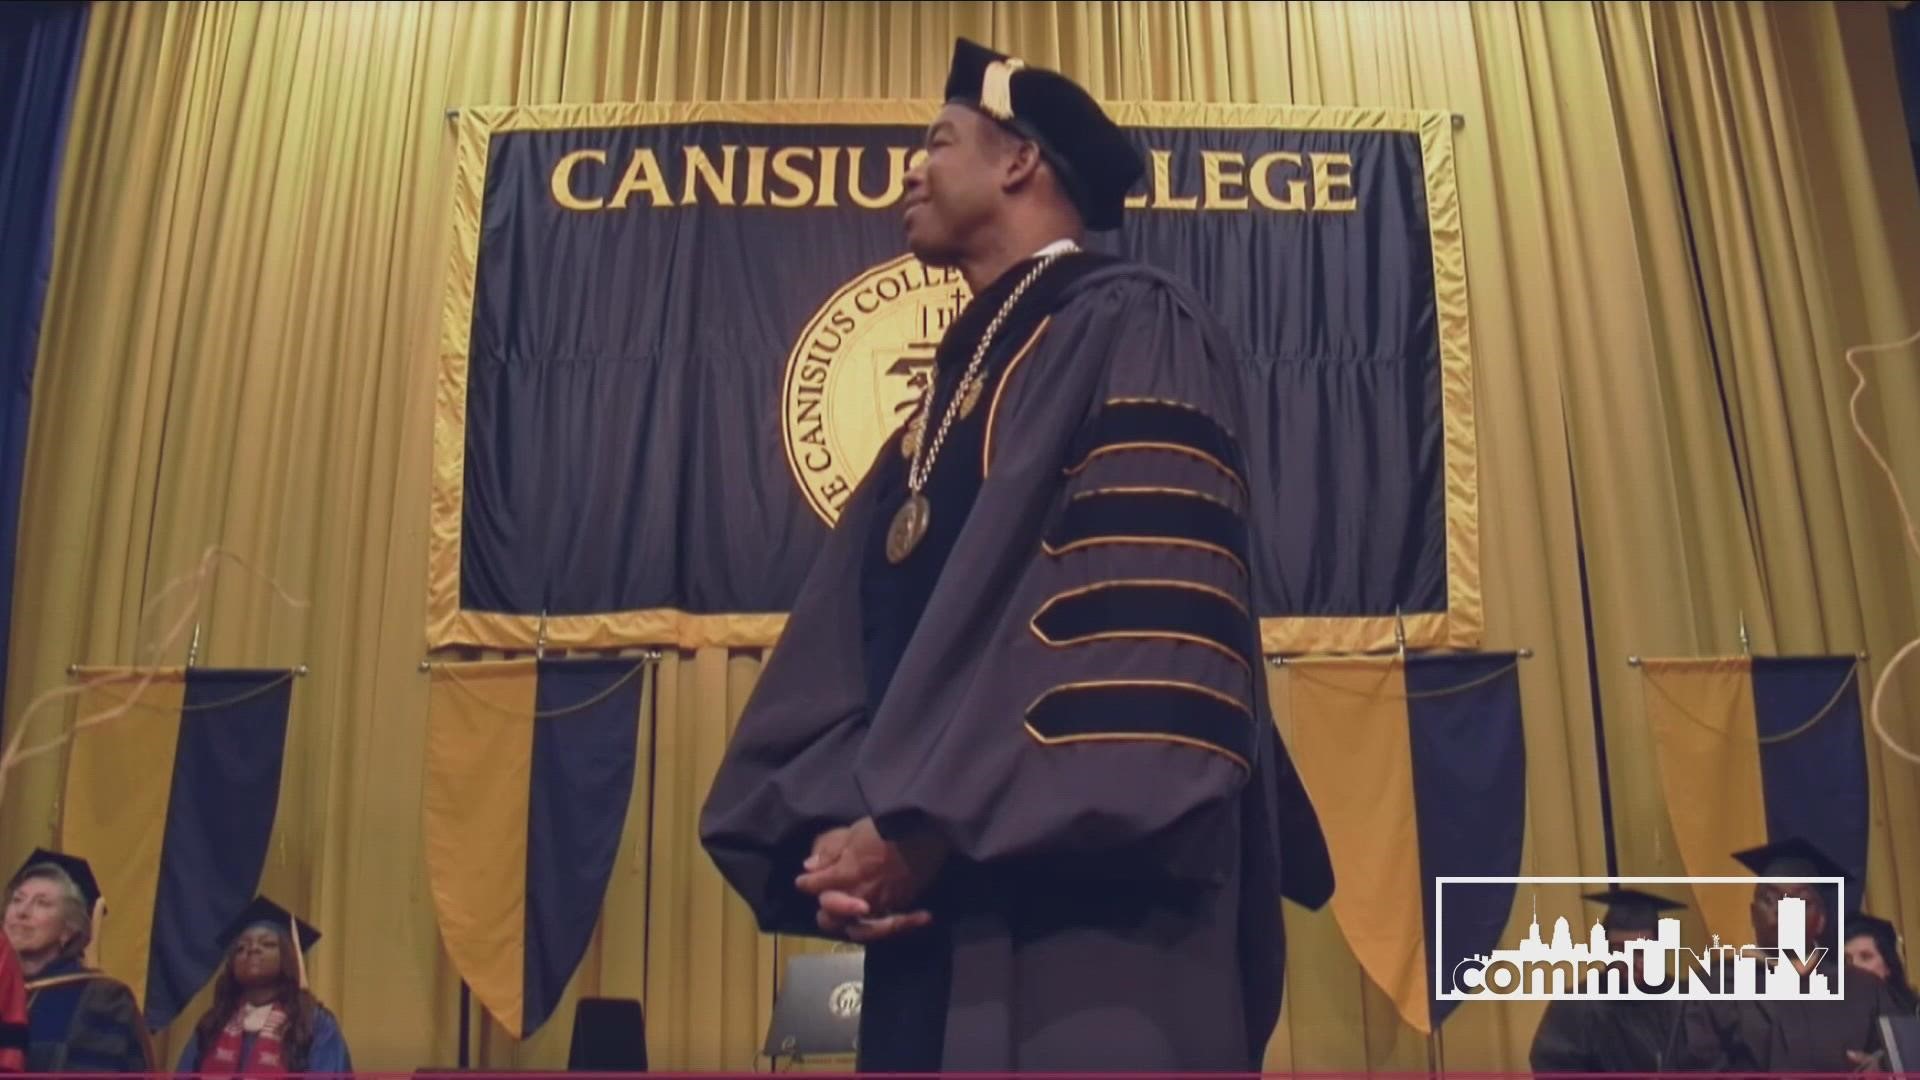 Canisius College has a new president. On Saturday, Steve Stoute was celebrated during the presidential inauguration on campus.